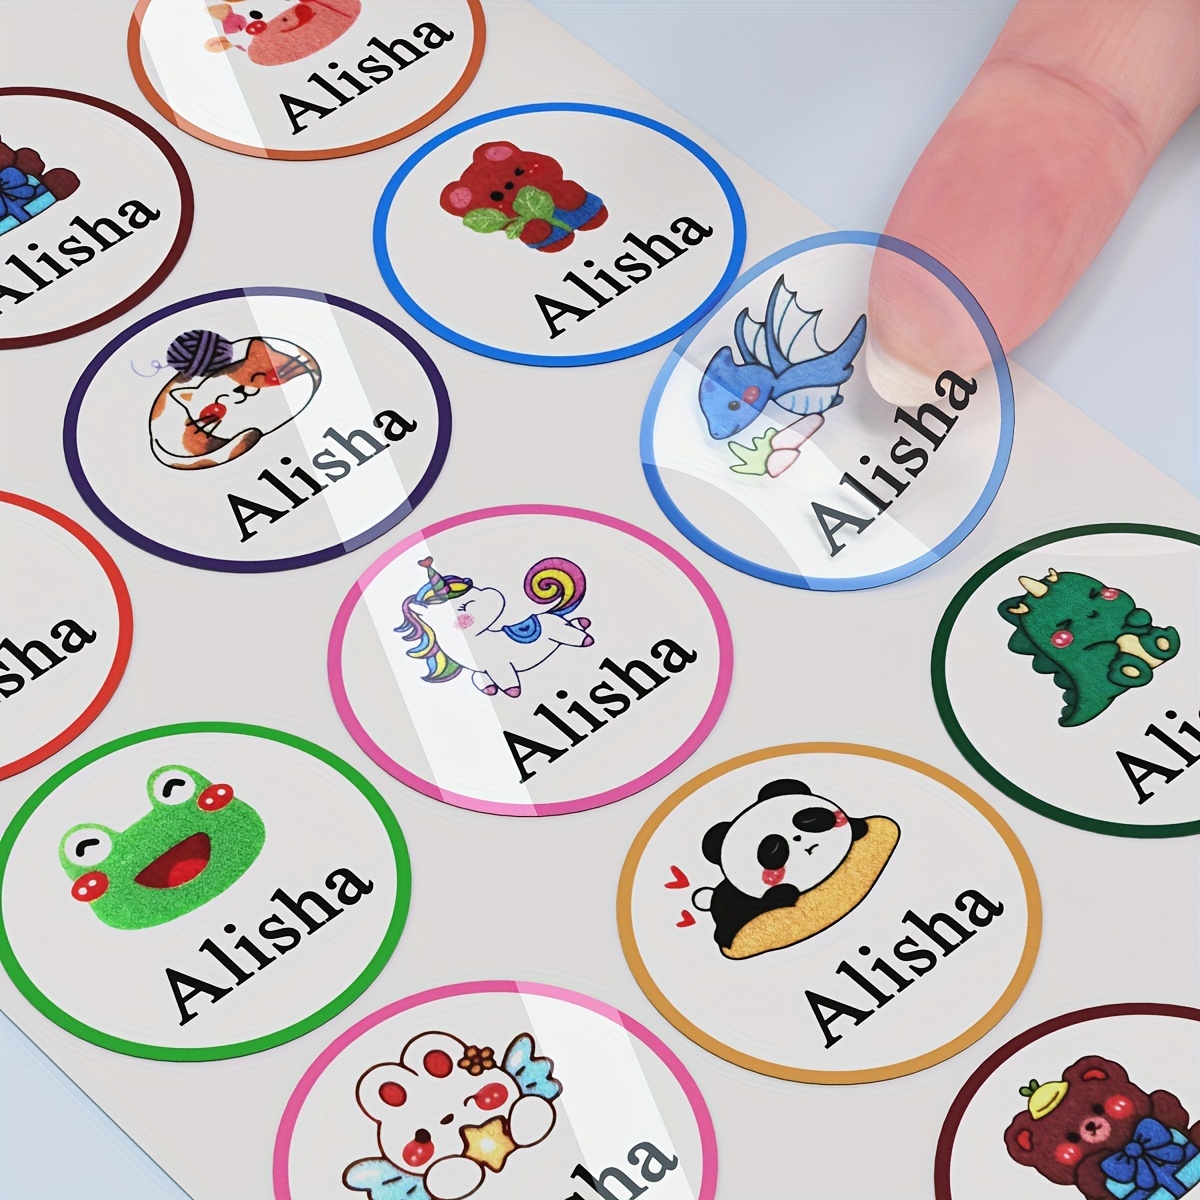 

30/60/120/240pcs [custom] Personalized Name Tags, Customizable Name Tags, Waterproof Sticker Labels For Water Bottles, Lunch Boxes, Custom Waterproof Self-adhesive Labels For All People